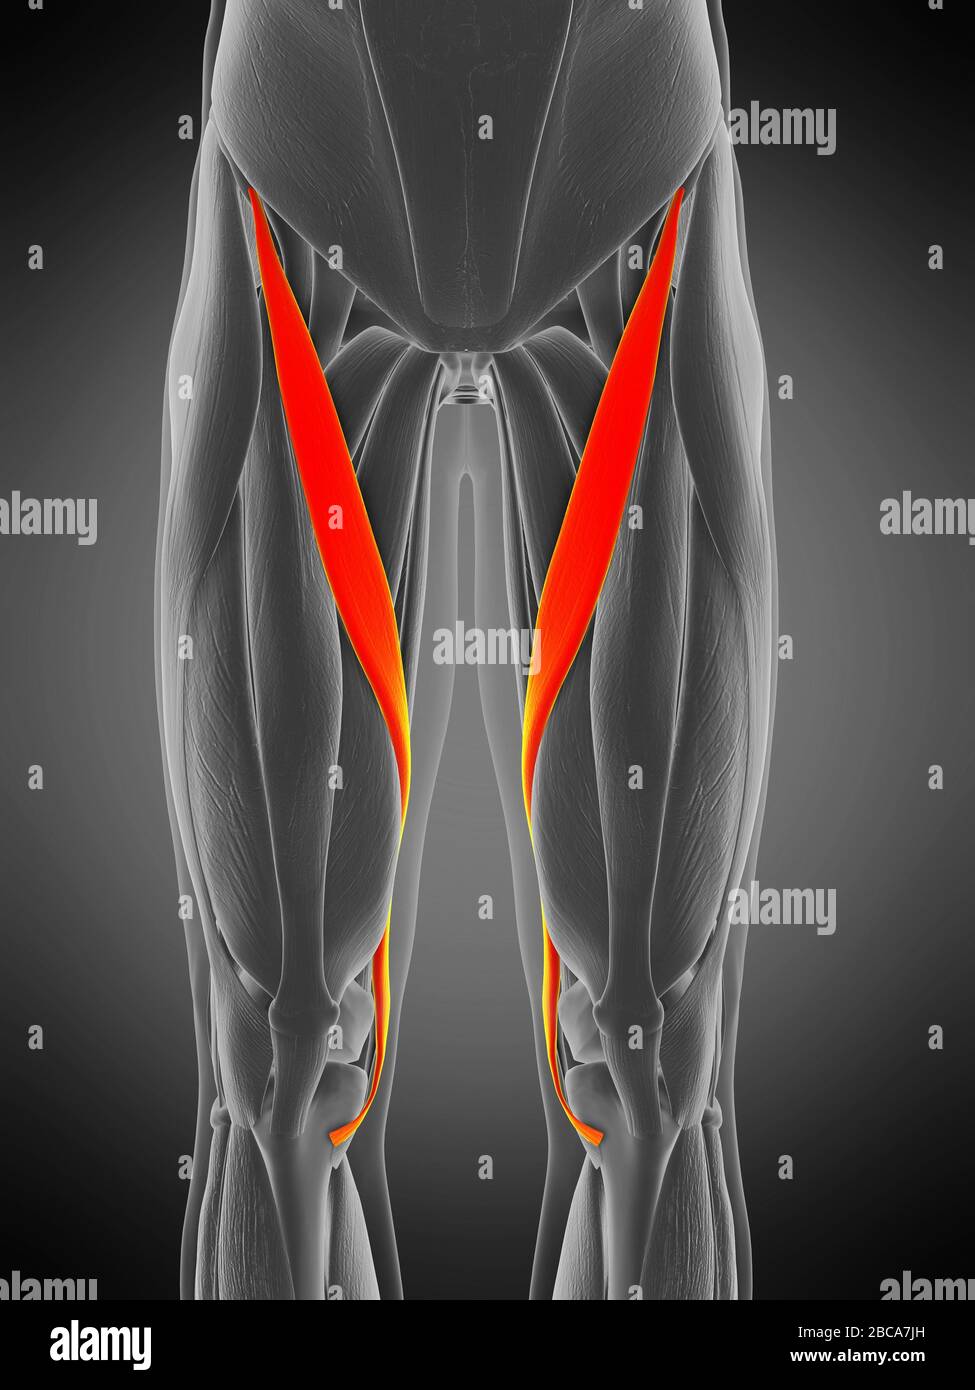 Sartorius Muscle High Resolution Stock Photography and Images - Alamy